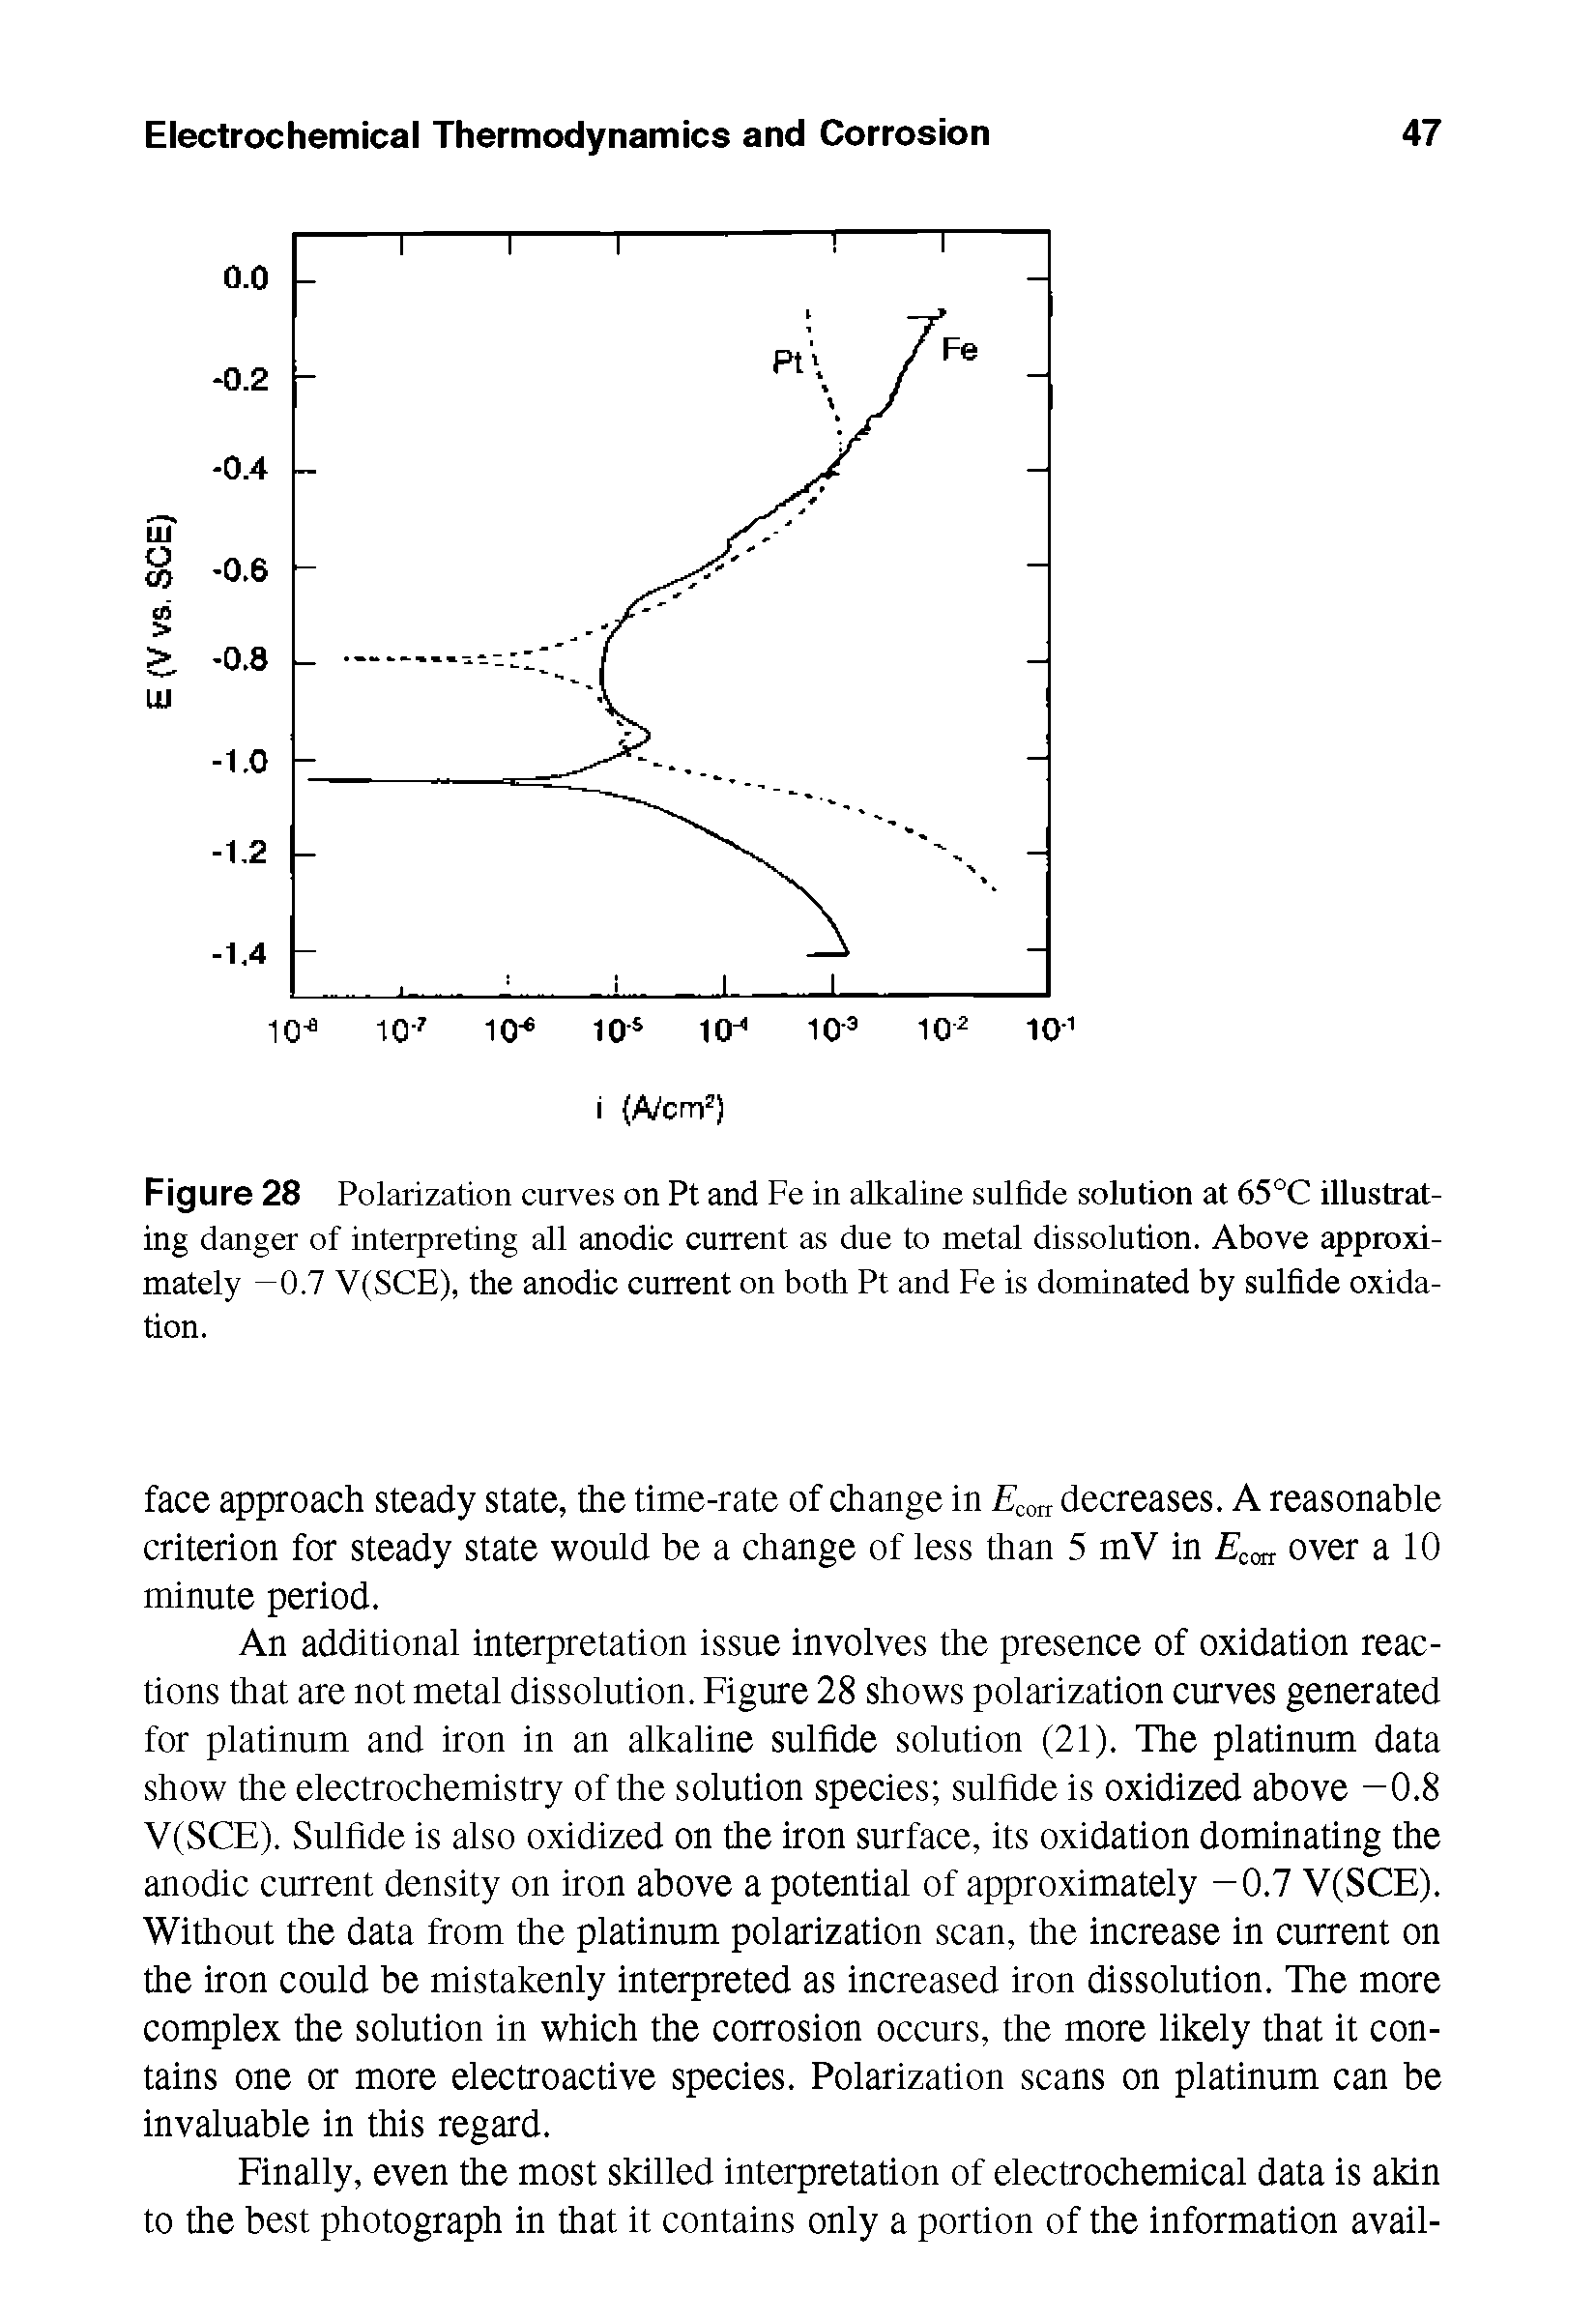 Figure 28 Polarization curves on Pt and Fe in alkaline sulfide solution at 65°C illustrating danger of interpreting all anodic current as due to metal dissolution. Above approximately —0.7 V(SCE), the anodic current on both Pt and Fe is dominated by sulfide oxidation.